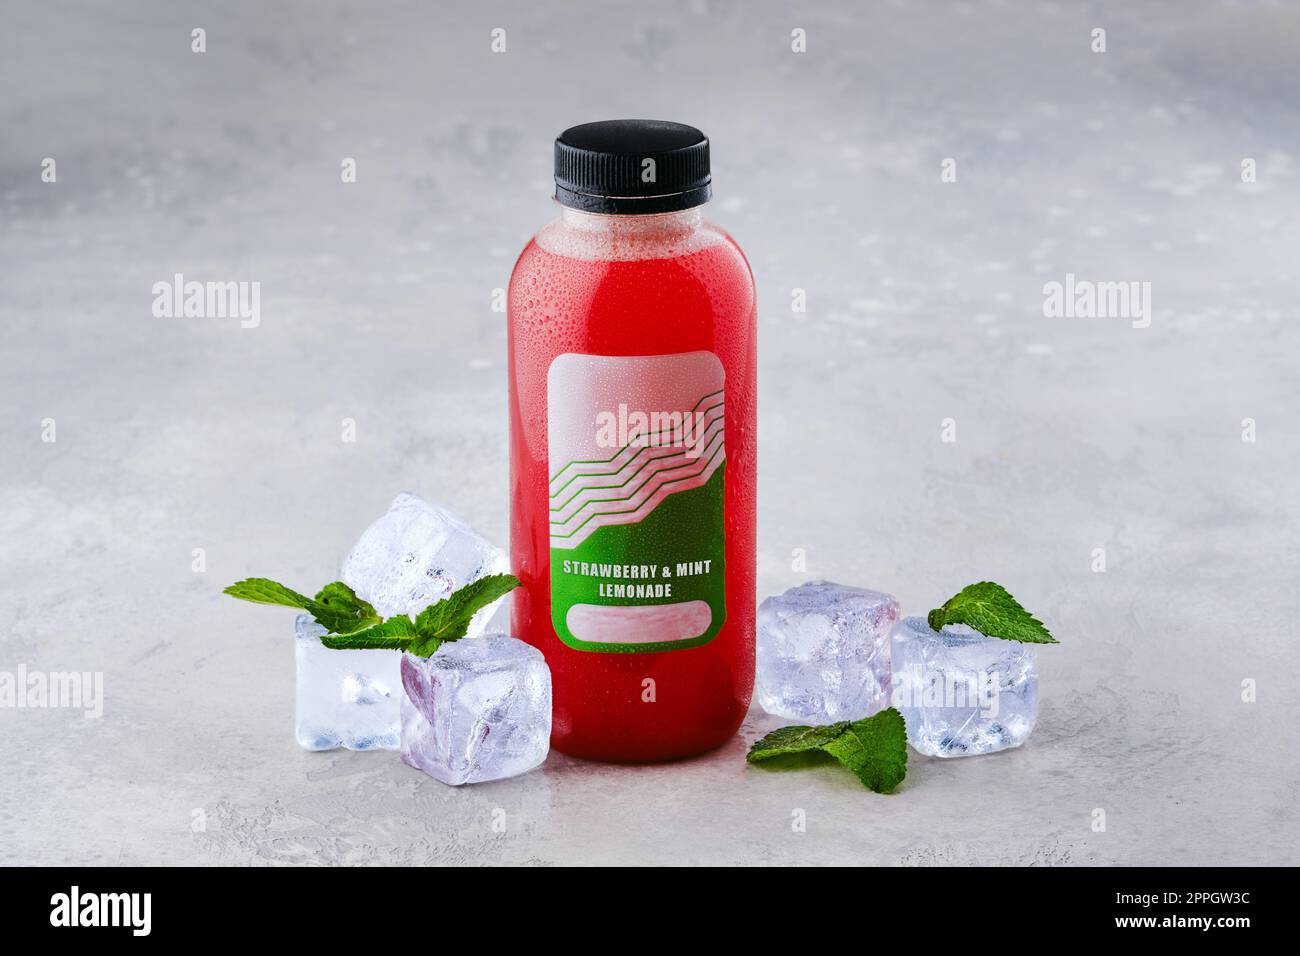 Small bottle with strawberry and mint ice lemonade Stock Photo